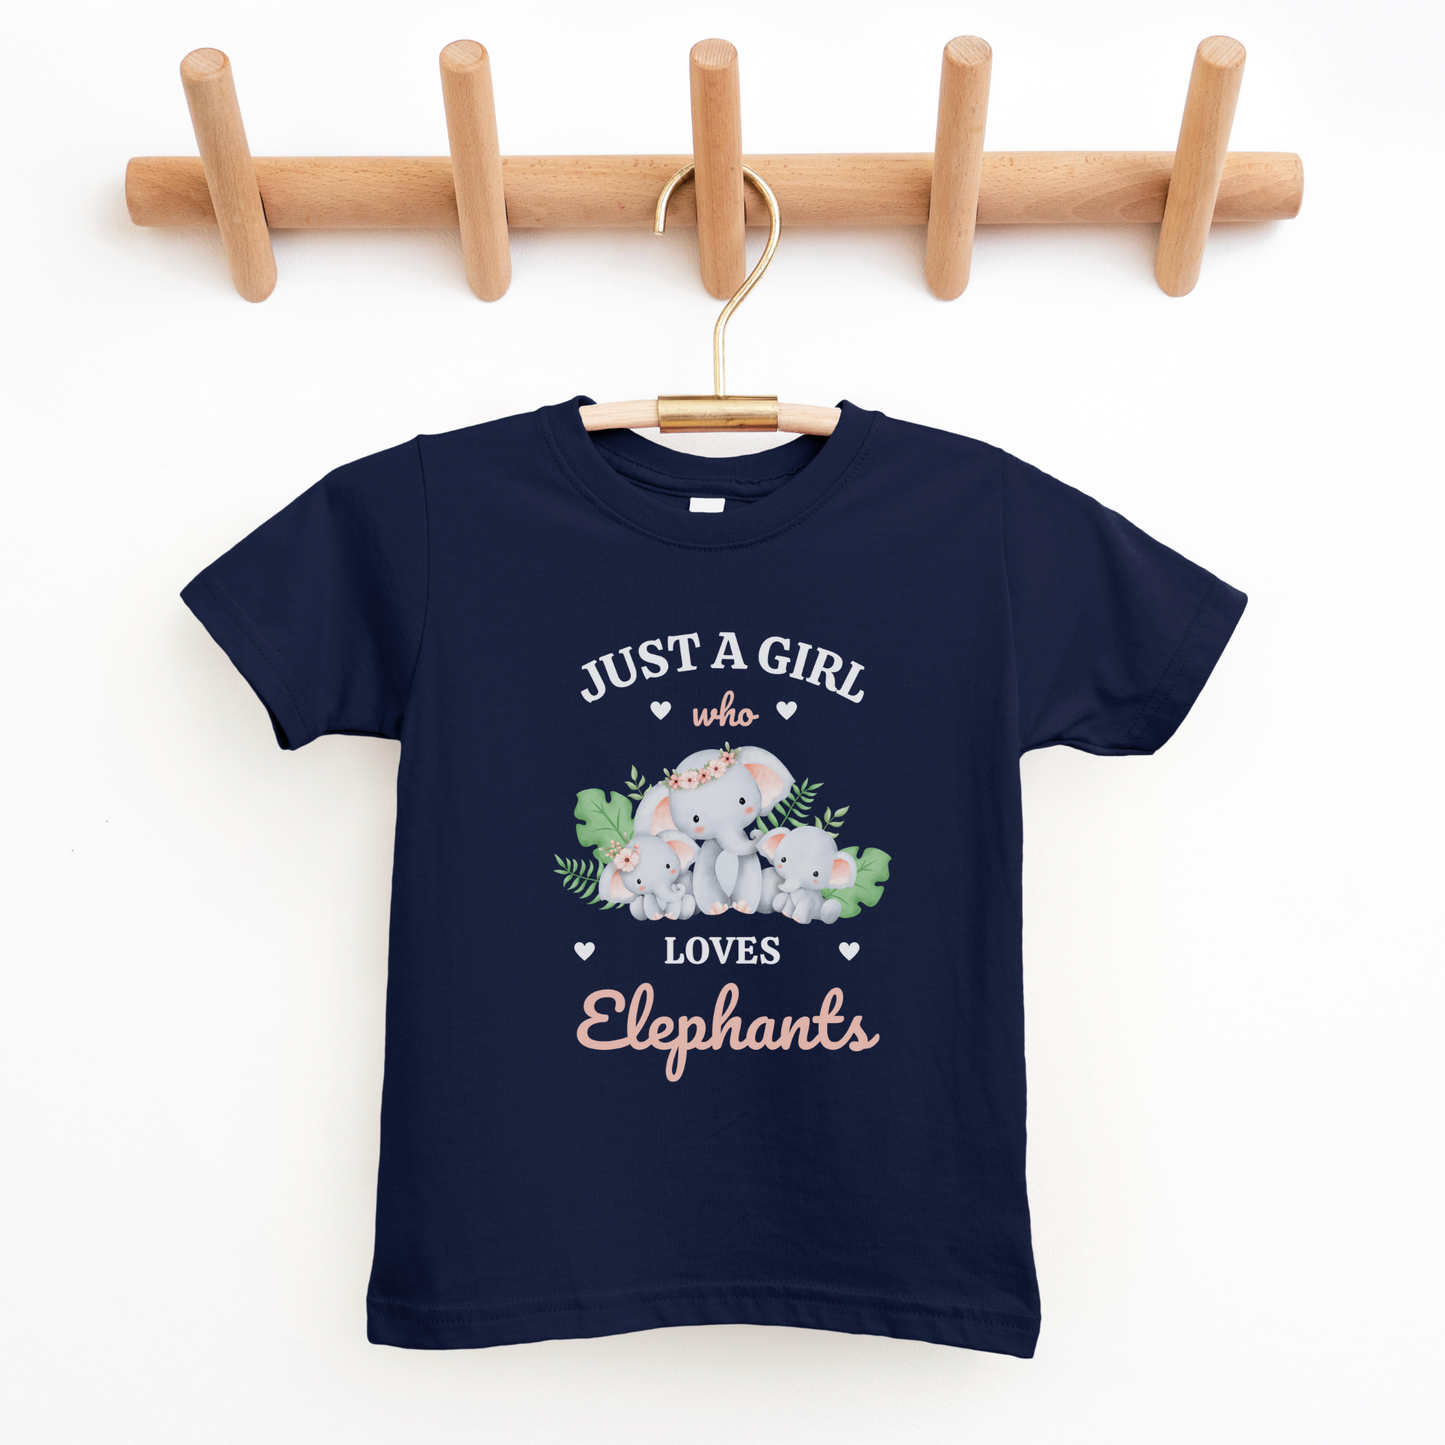 Just a Girl who loves Elephants - Girls T-shirt | 3 - 13 years